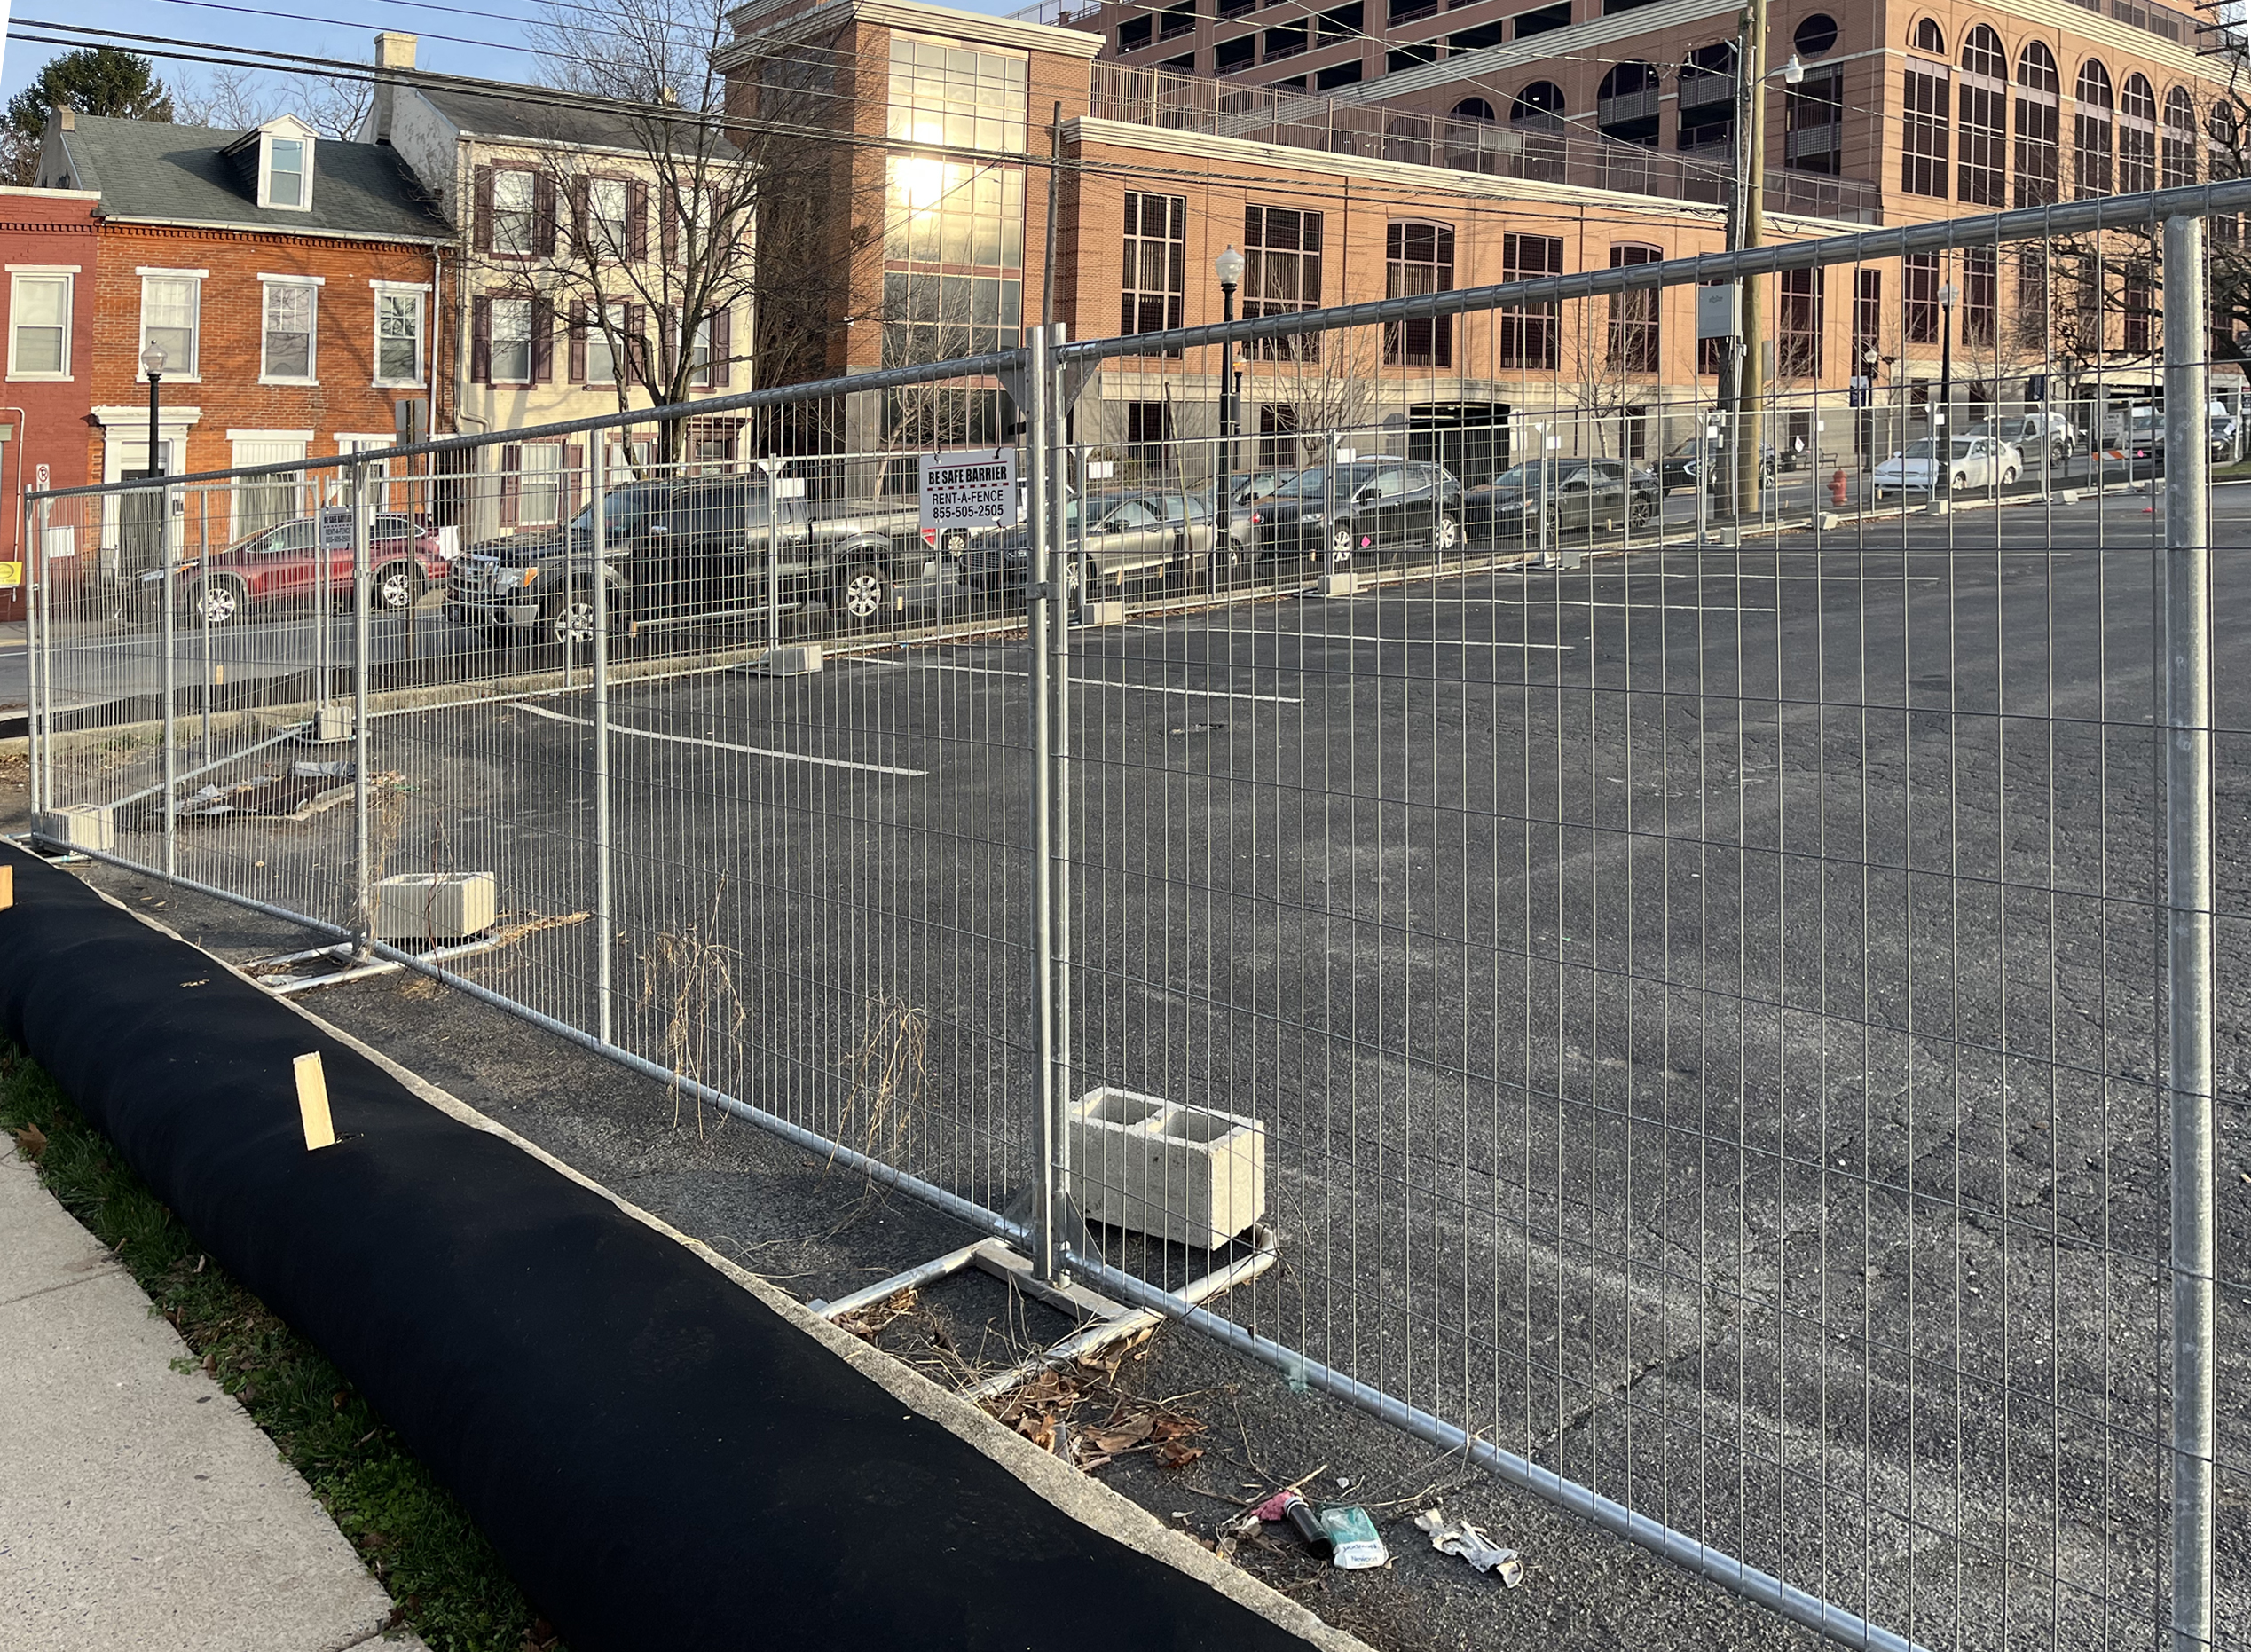 panel fence installed around a parking lot provides protection